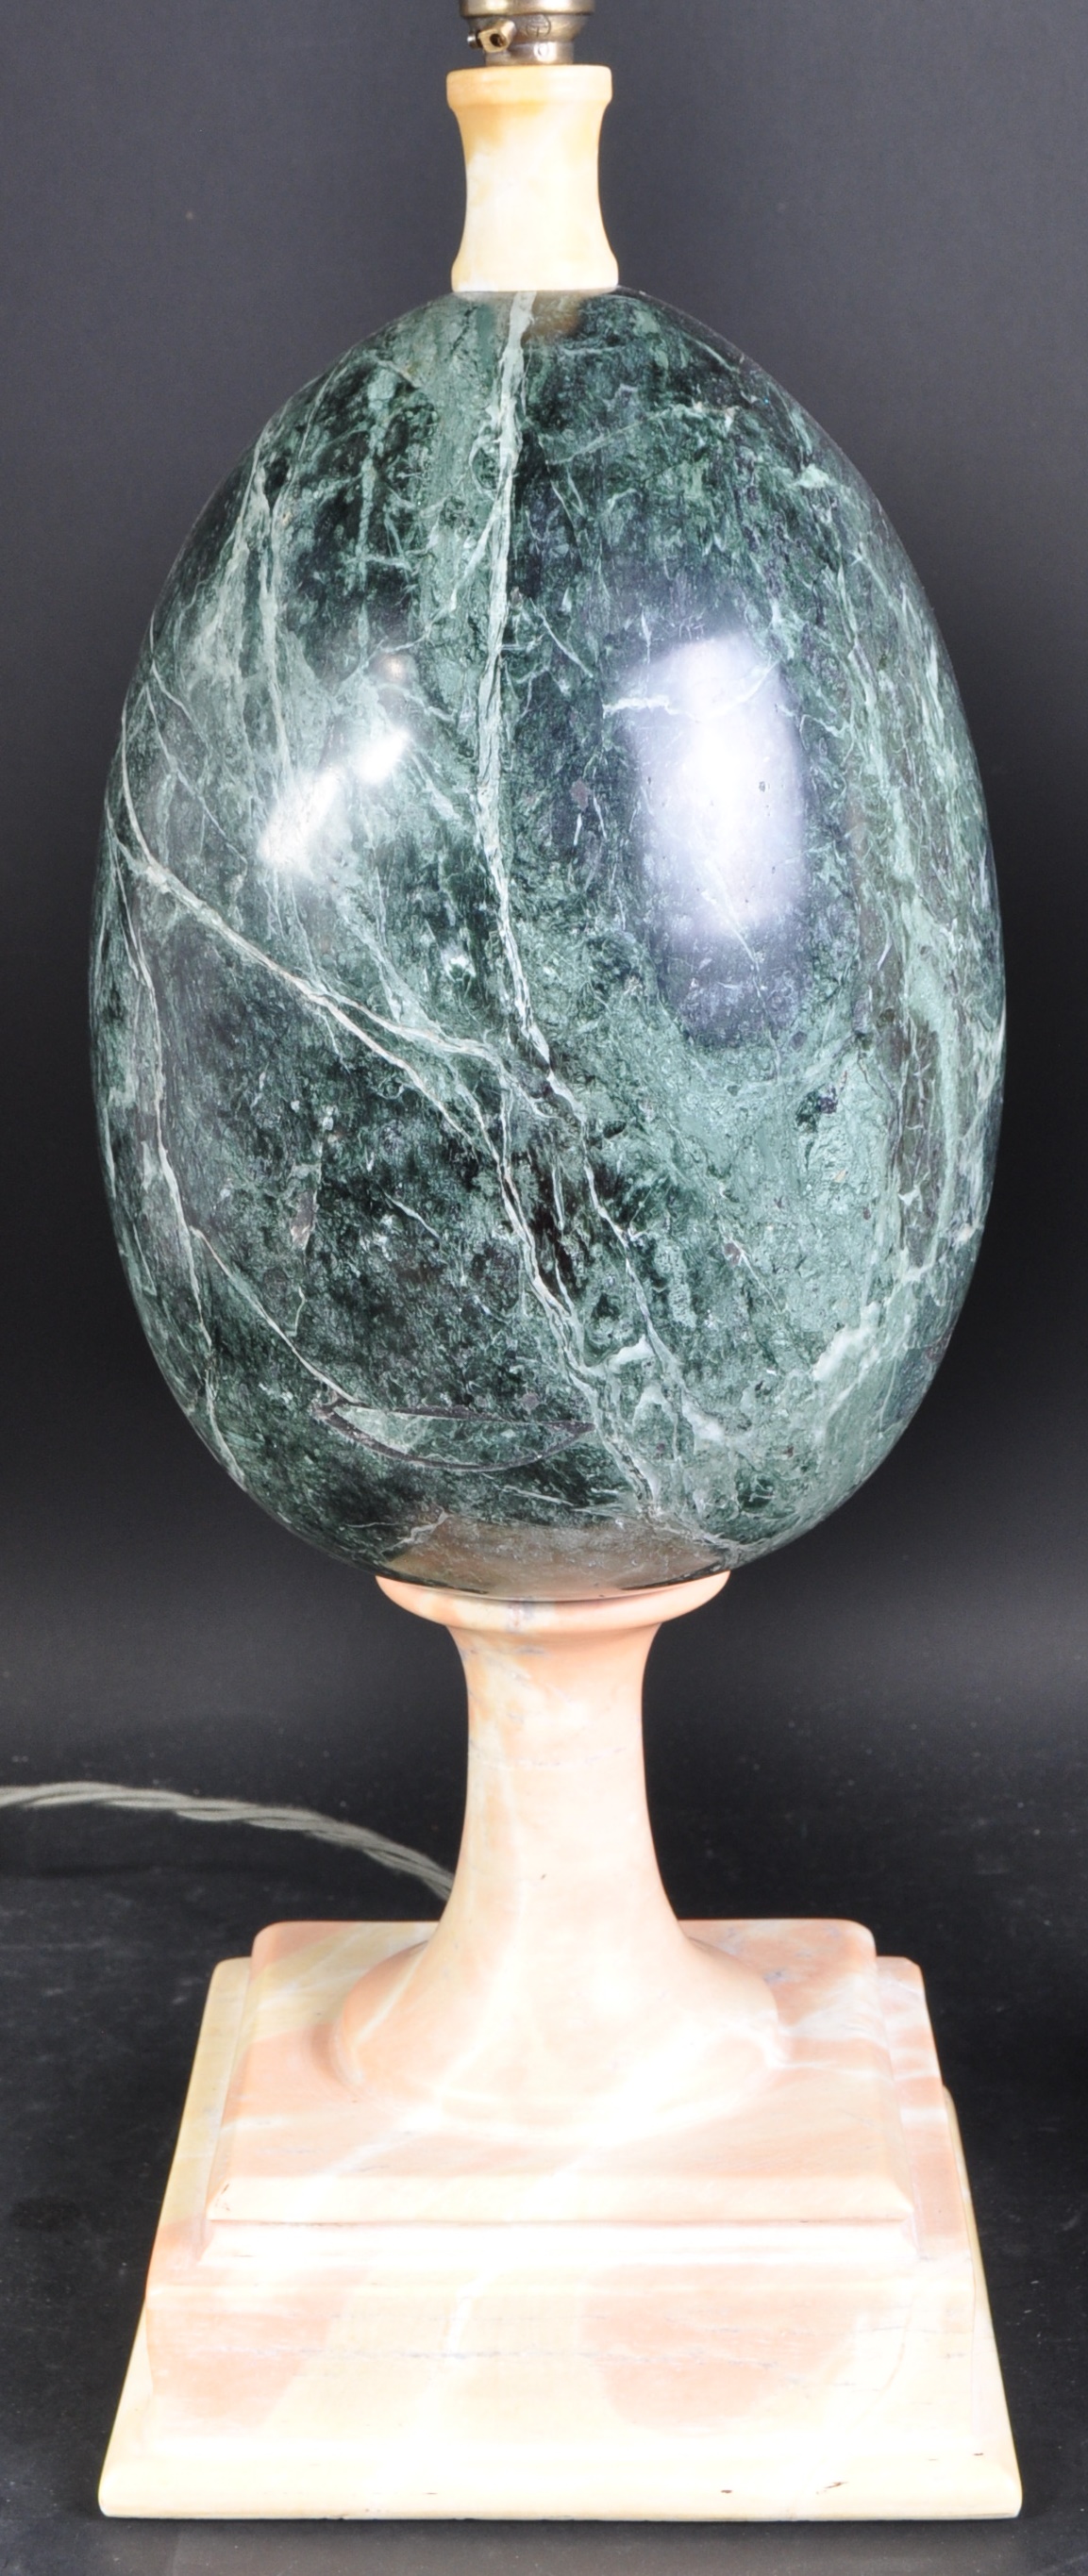 PAIR OF MARBLE EGG TABLE LAMPS - Image 2 of 4